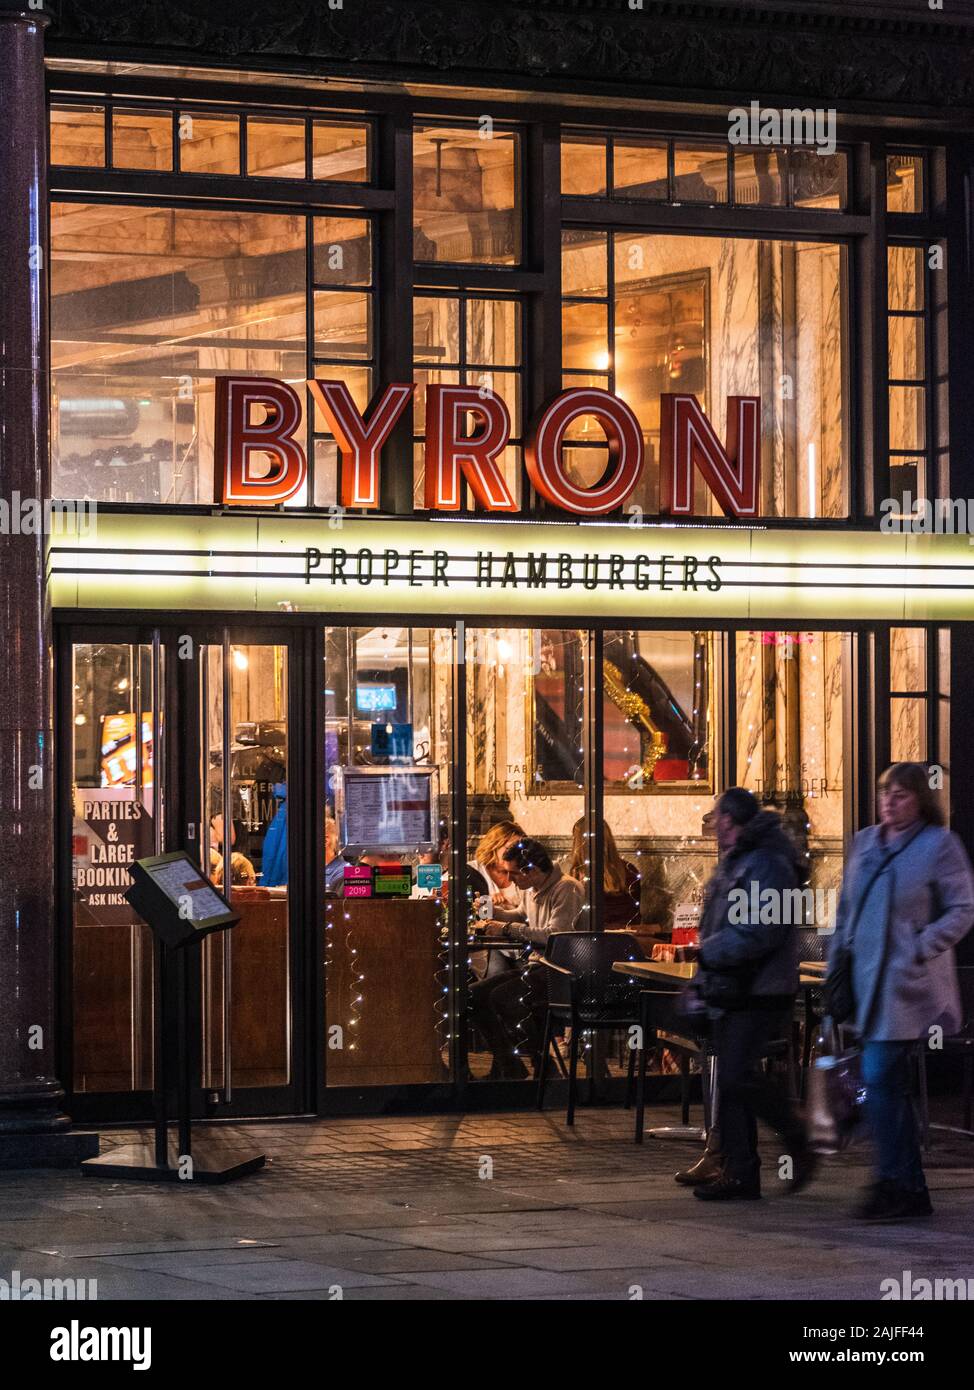 Byron Hamburgers Restaurant  on the Strand, London. Byron is a UK based restaurant chain focussing on hamburgers. Founded 2007 Stock Photo